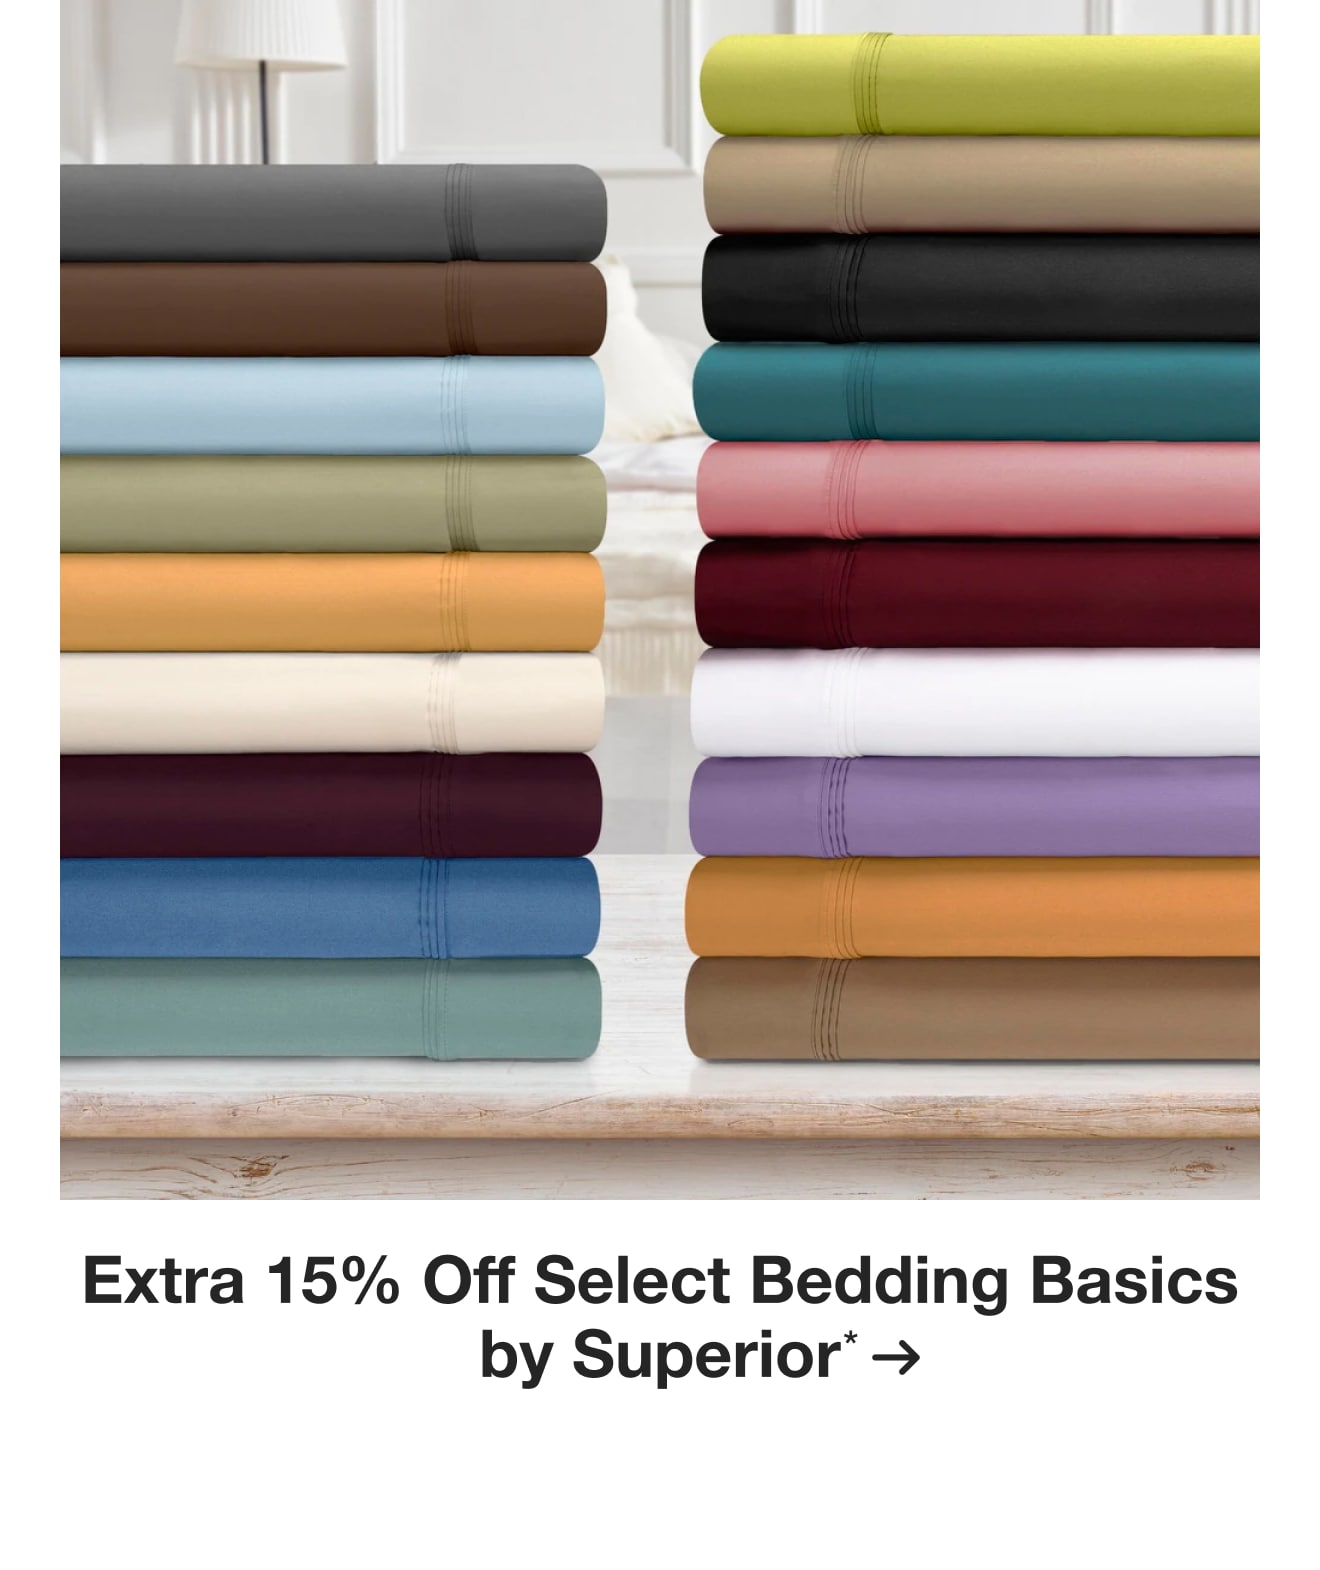 Extra 15% off Select Bedding Basics by Superior*